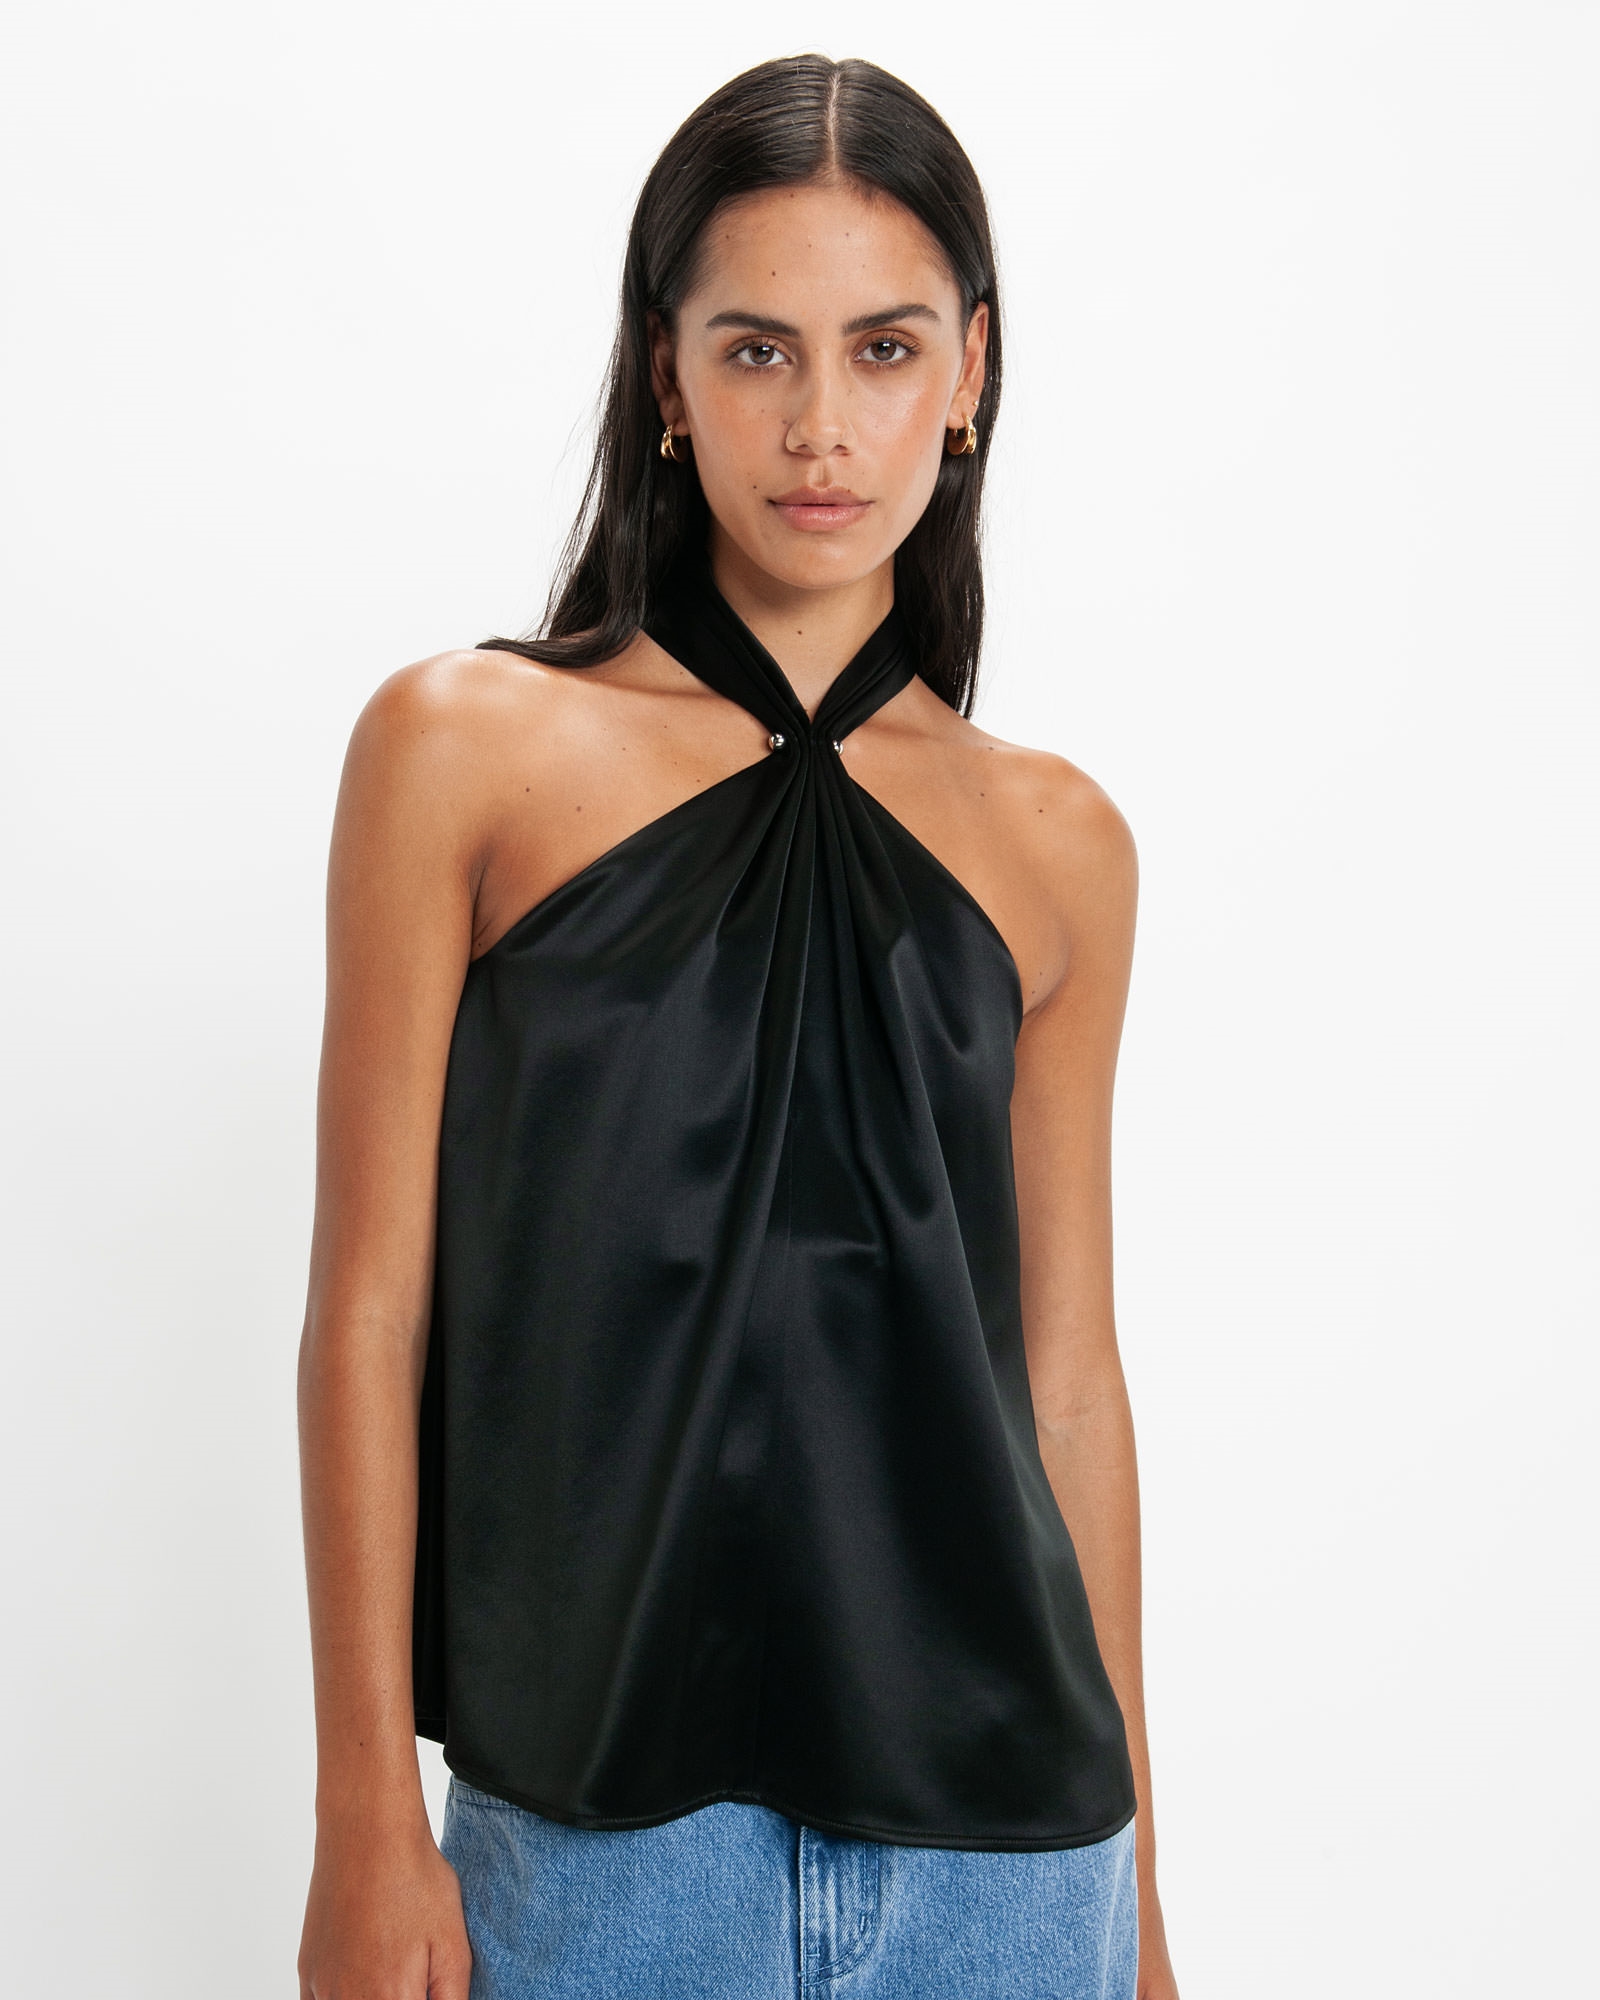 Satin Halter Top | Buy Tops and Shirts Online - Cue